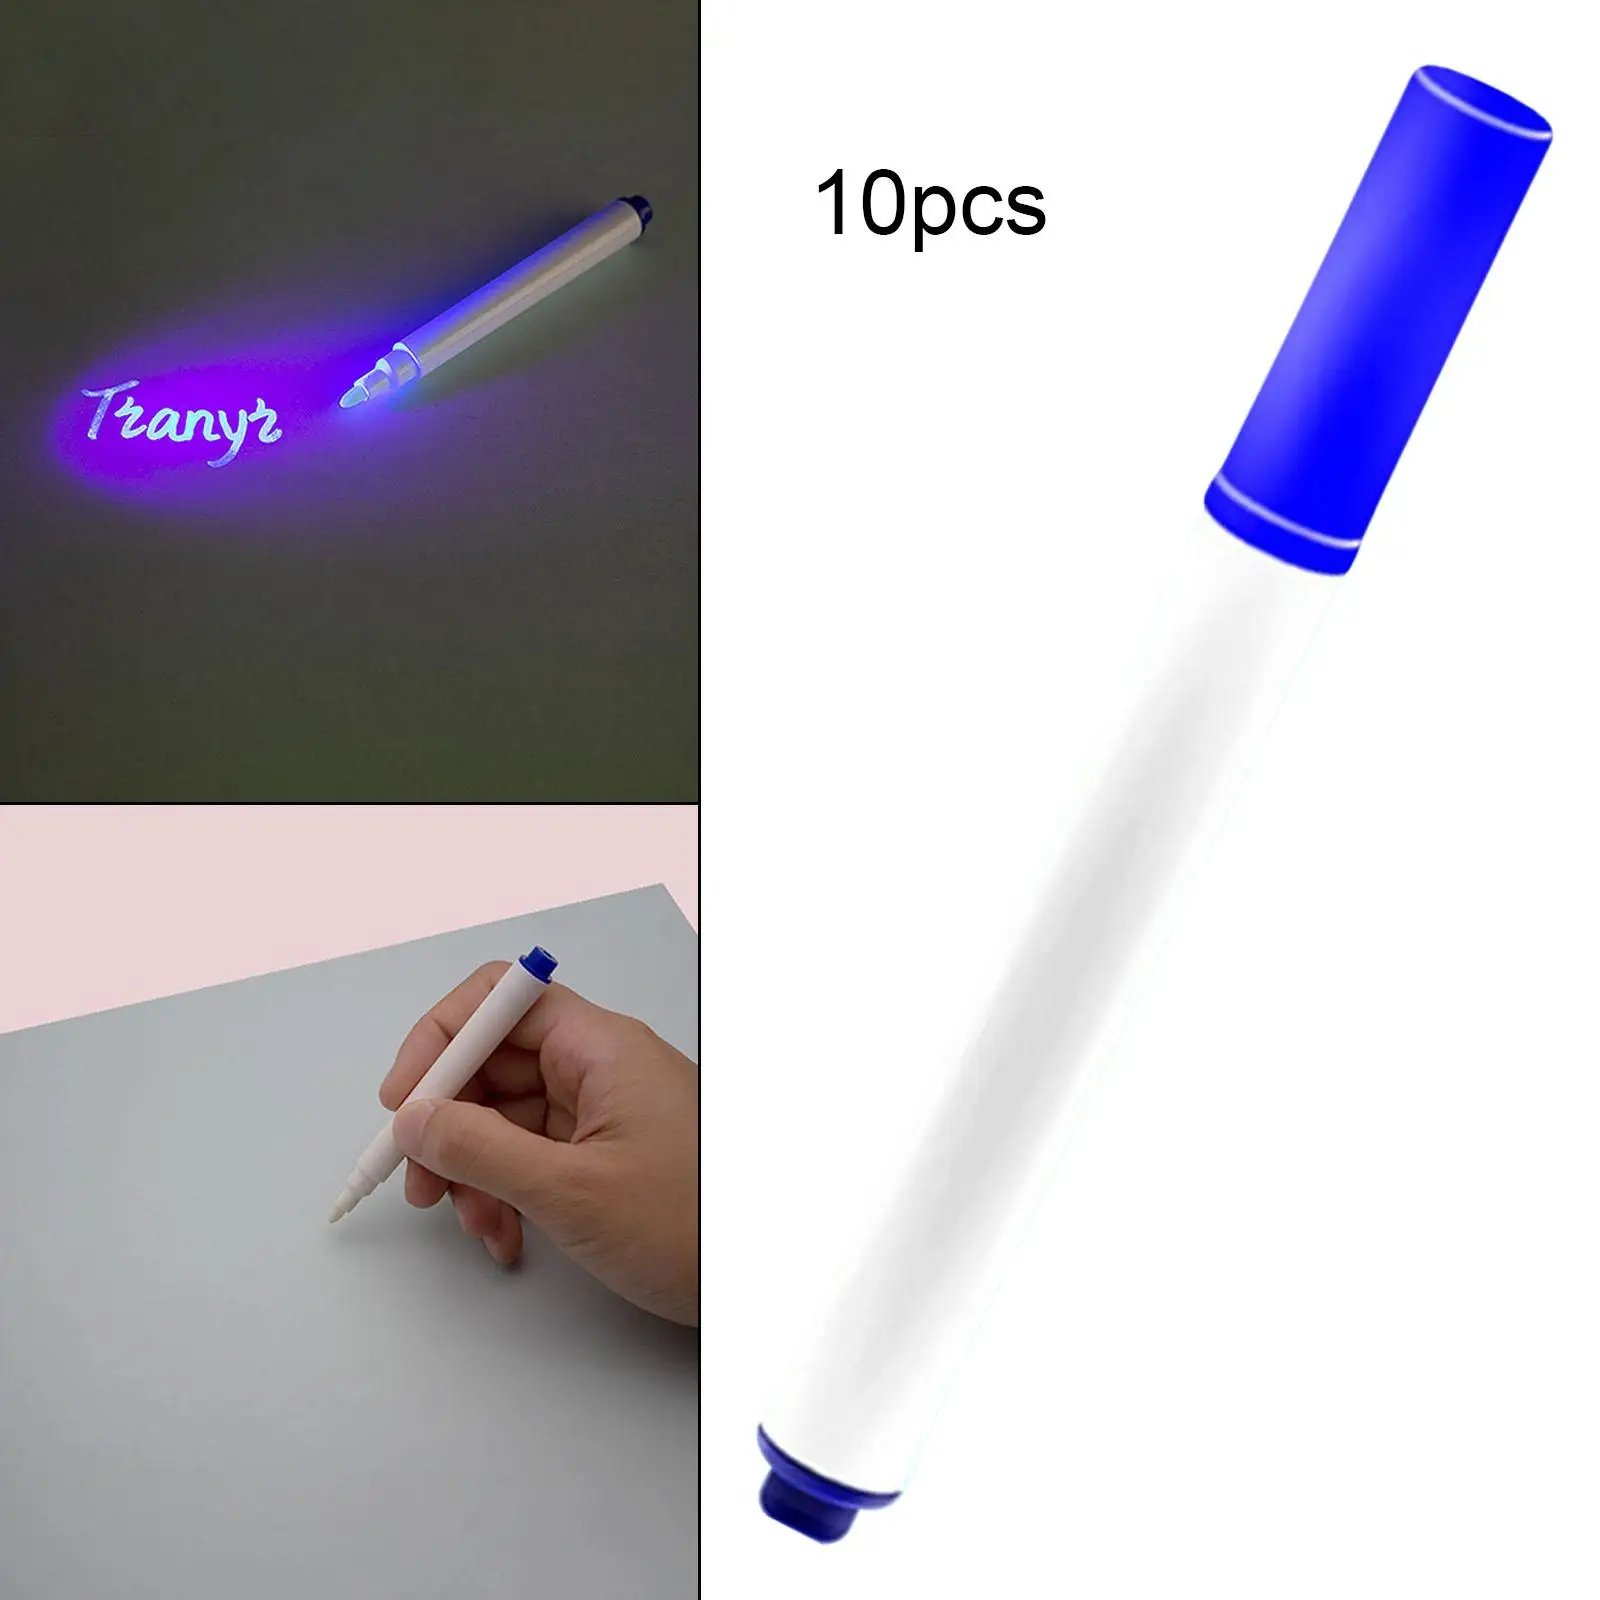 10Pcs Invisible Ink Pen Marker Pens 0.5cm Point Painting Writing Drawing for Birthday Notes Doodle Halloween Party Bags